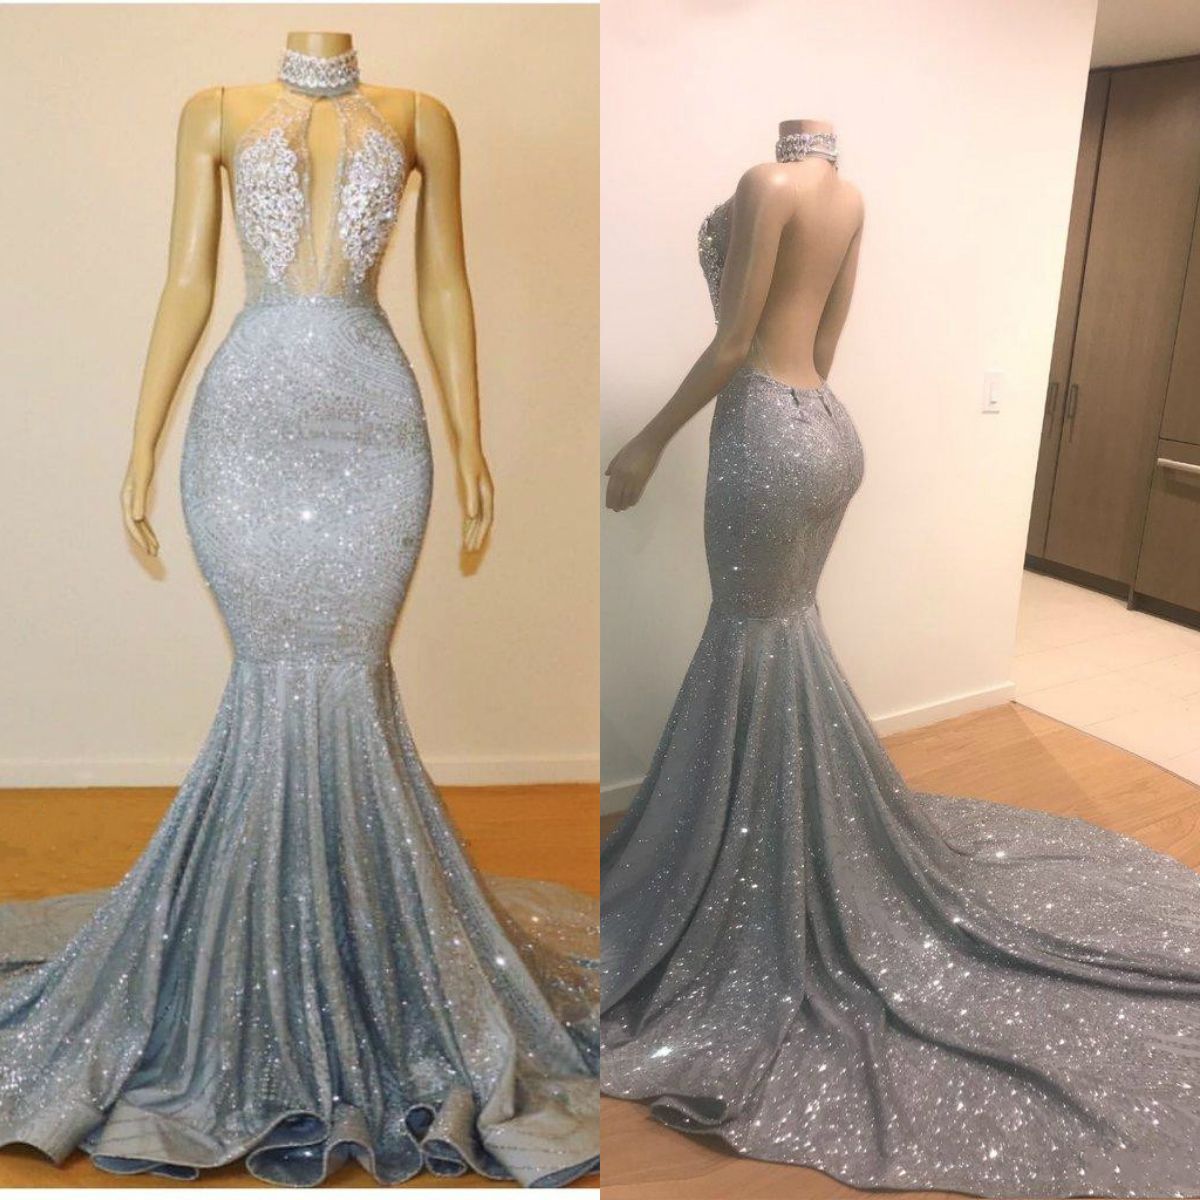 2019 Glitz Sparkly Silver Prom Dresses Sheer High Neck Backless Mermaid ...